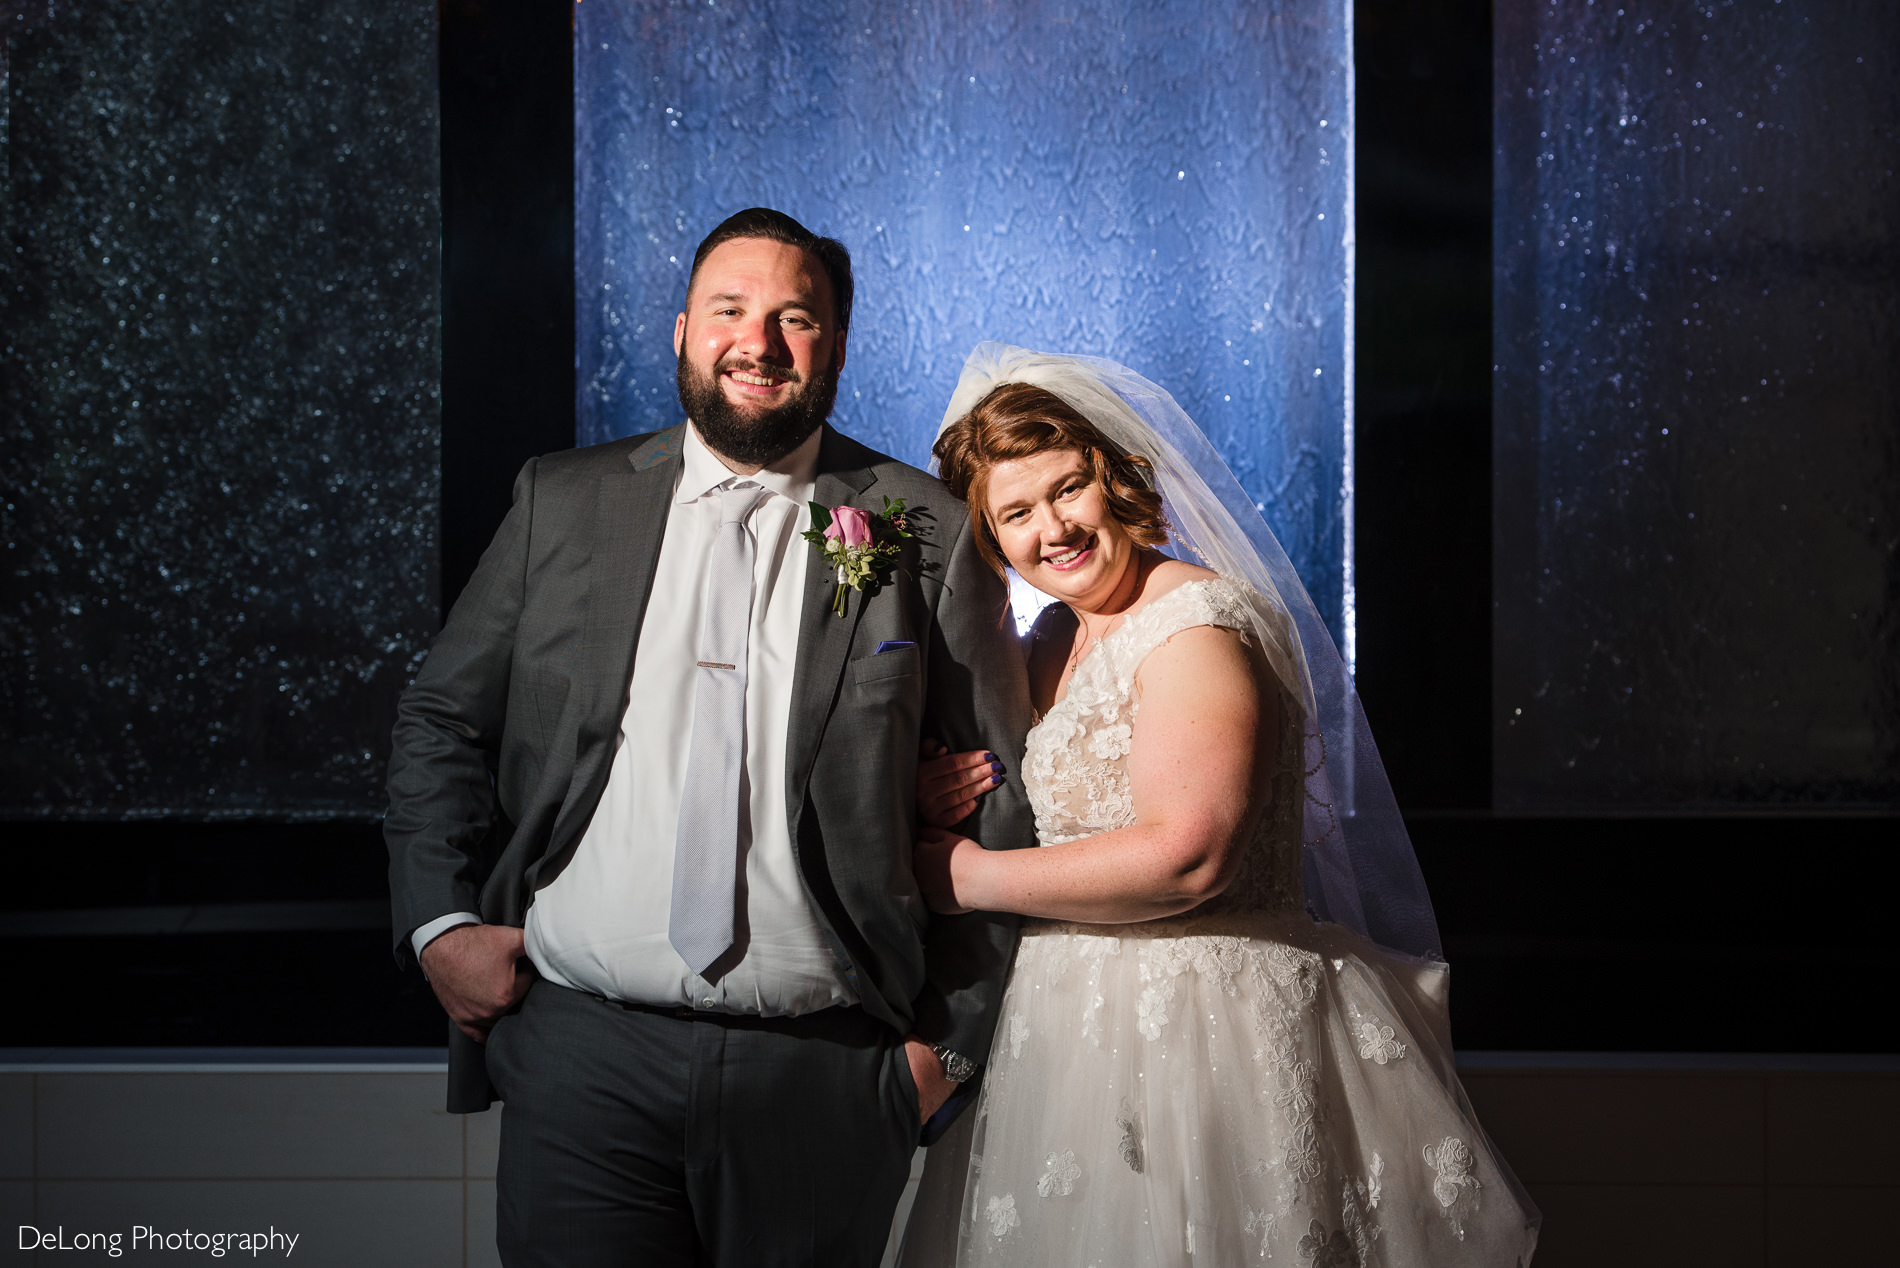 Bride and groom portrait in front of water feature at the Embassy Suites by Hilton Charlotte by Charlotte wedding photographers DeLong Photography